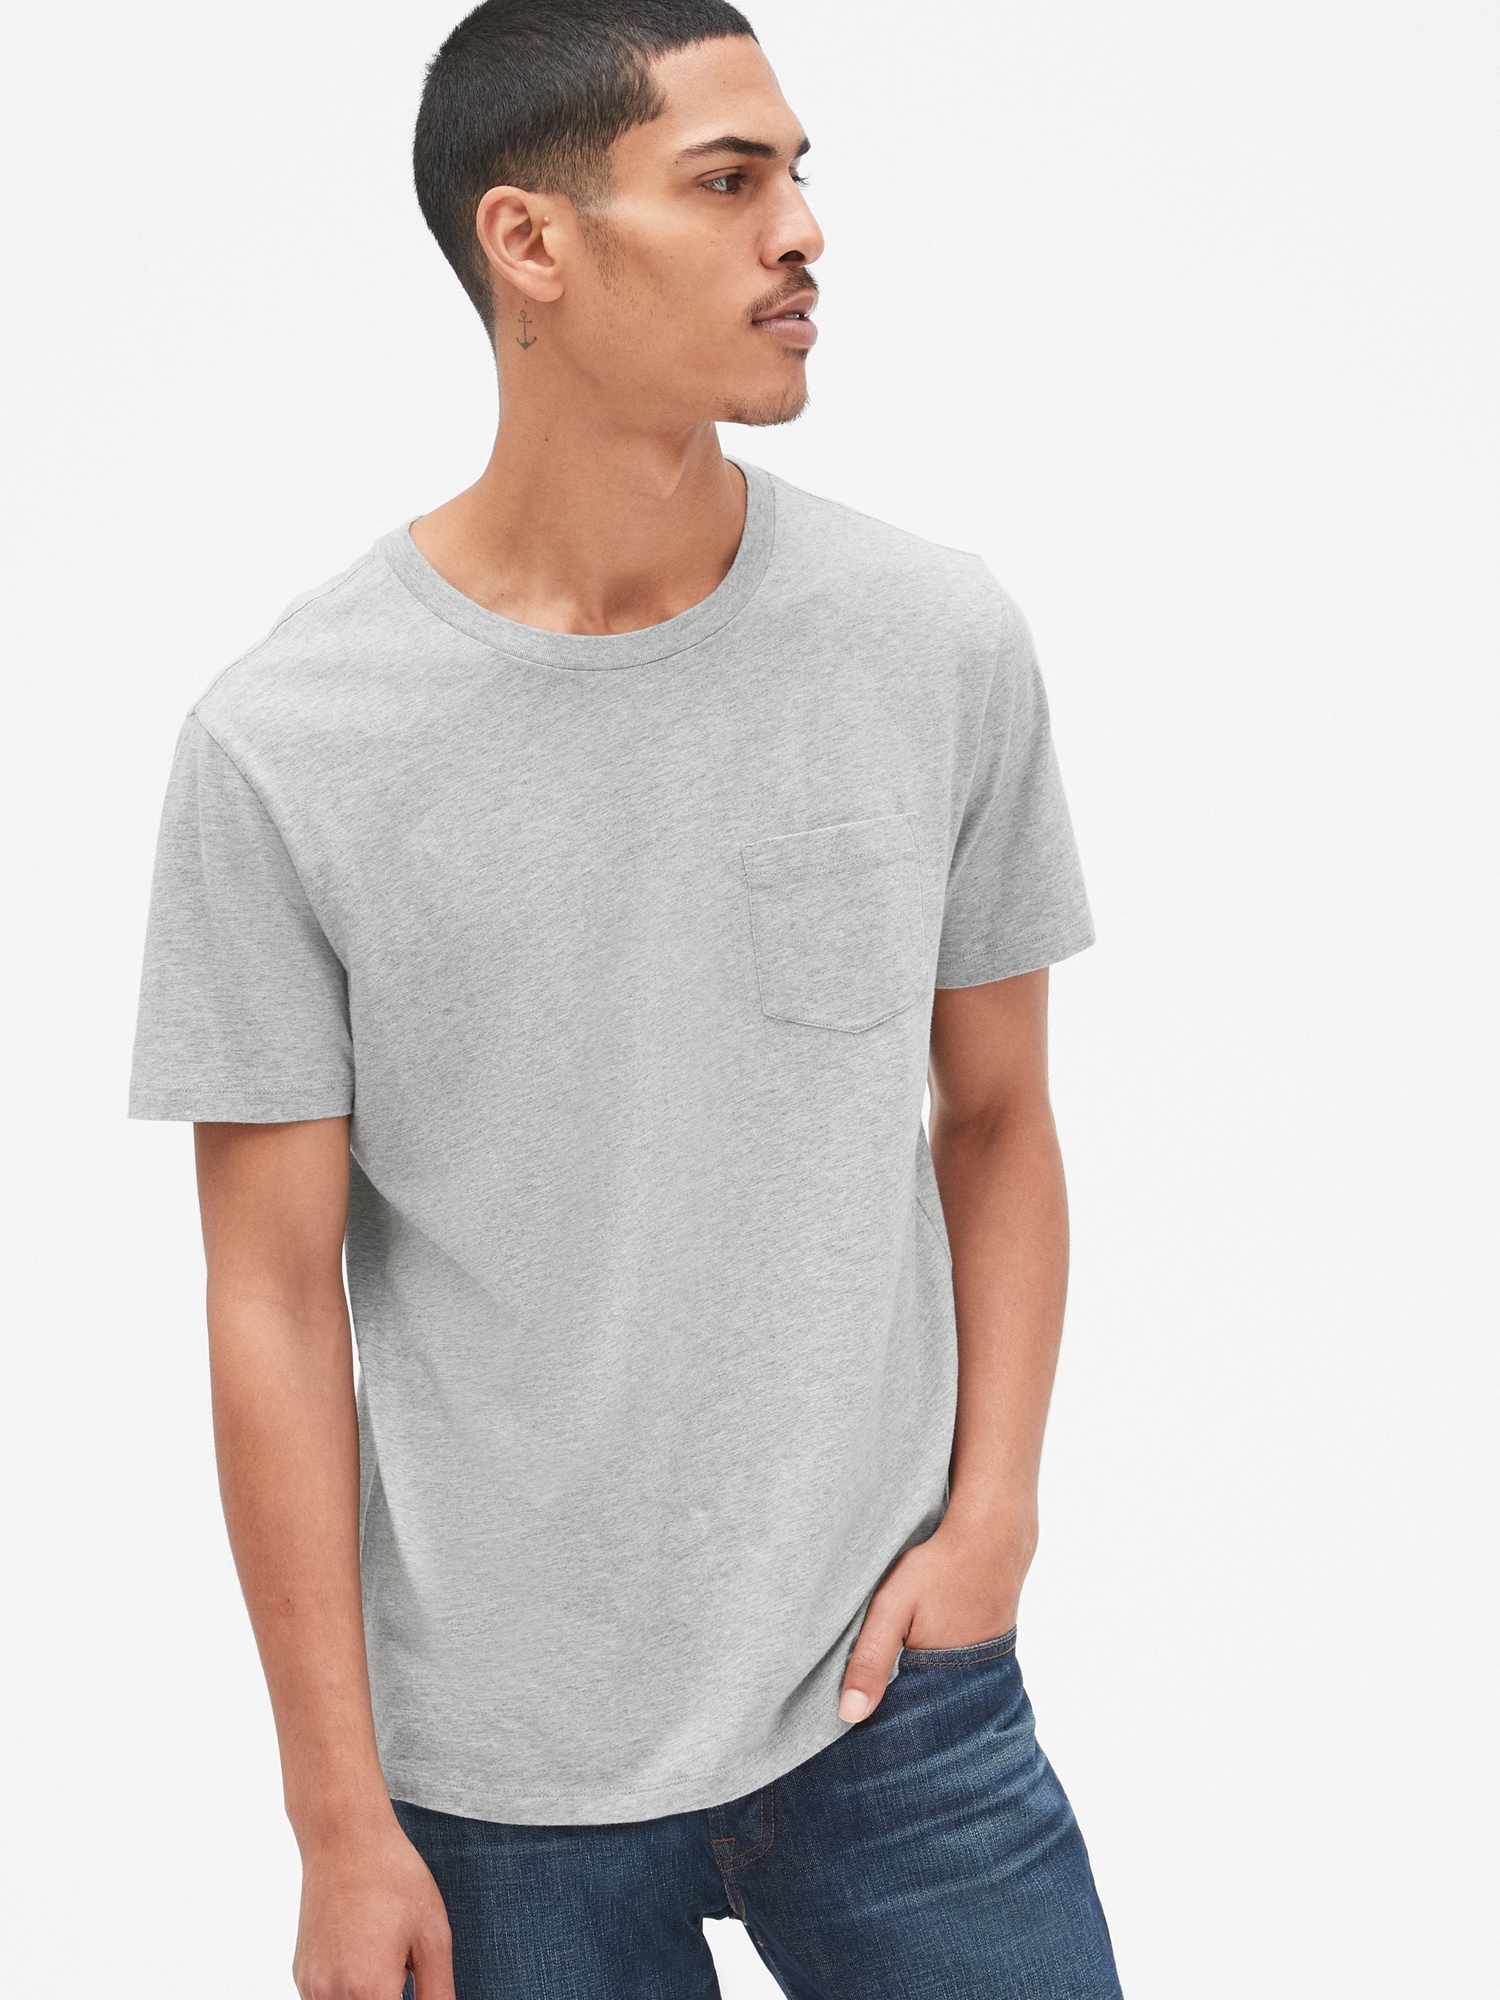 Download Get Mens Heather Pocket T-Shirt Front View Pictures ...